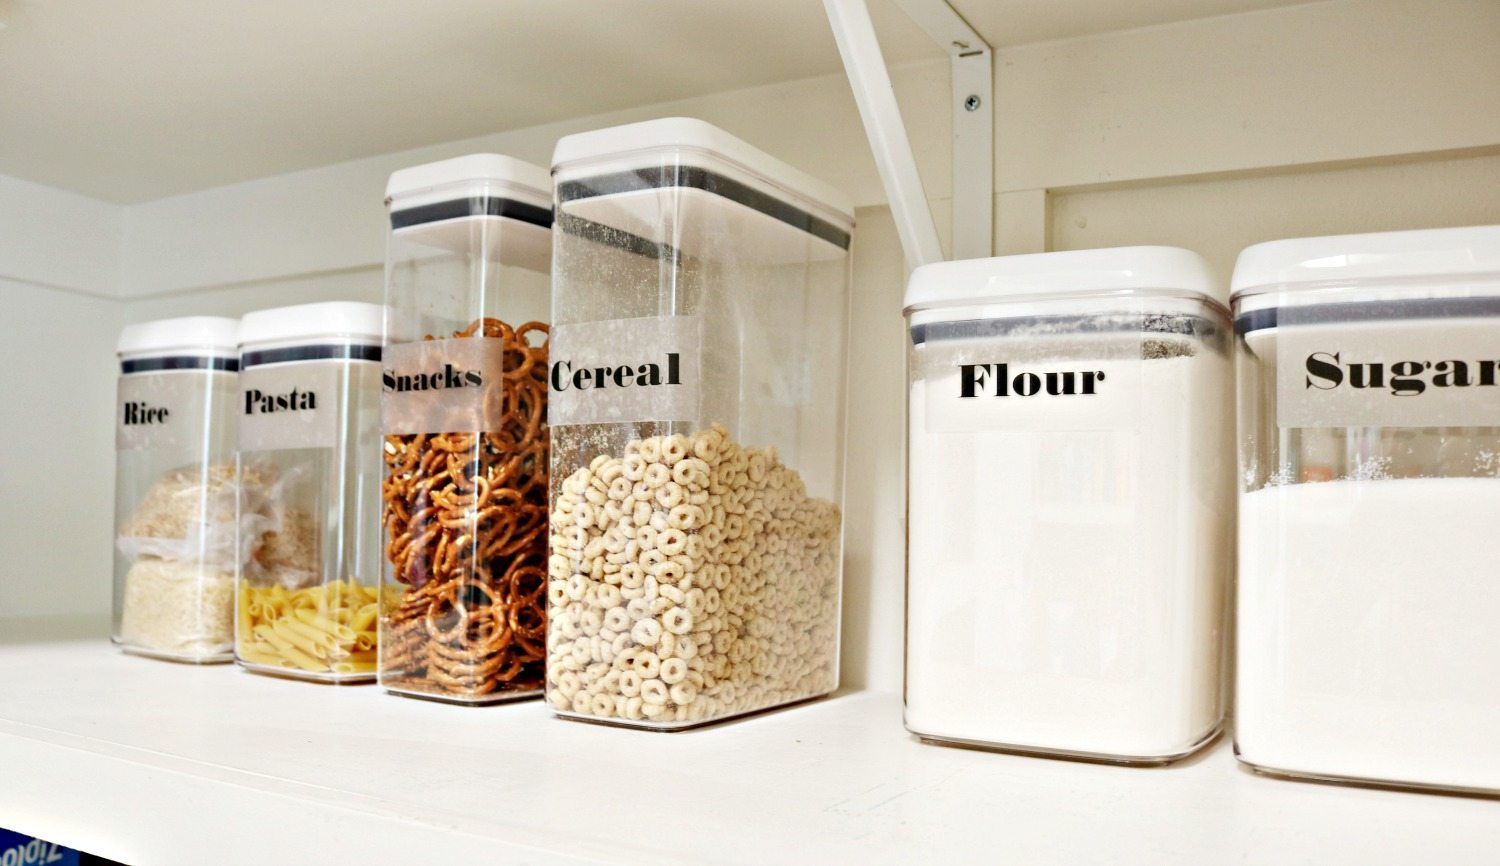 https://refreshrestyle.com/wp-content/uploads/2017/09/Organize-your-pantry-with-these-clear-containers.jpg